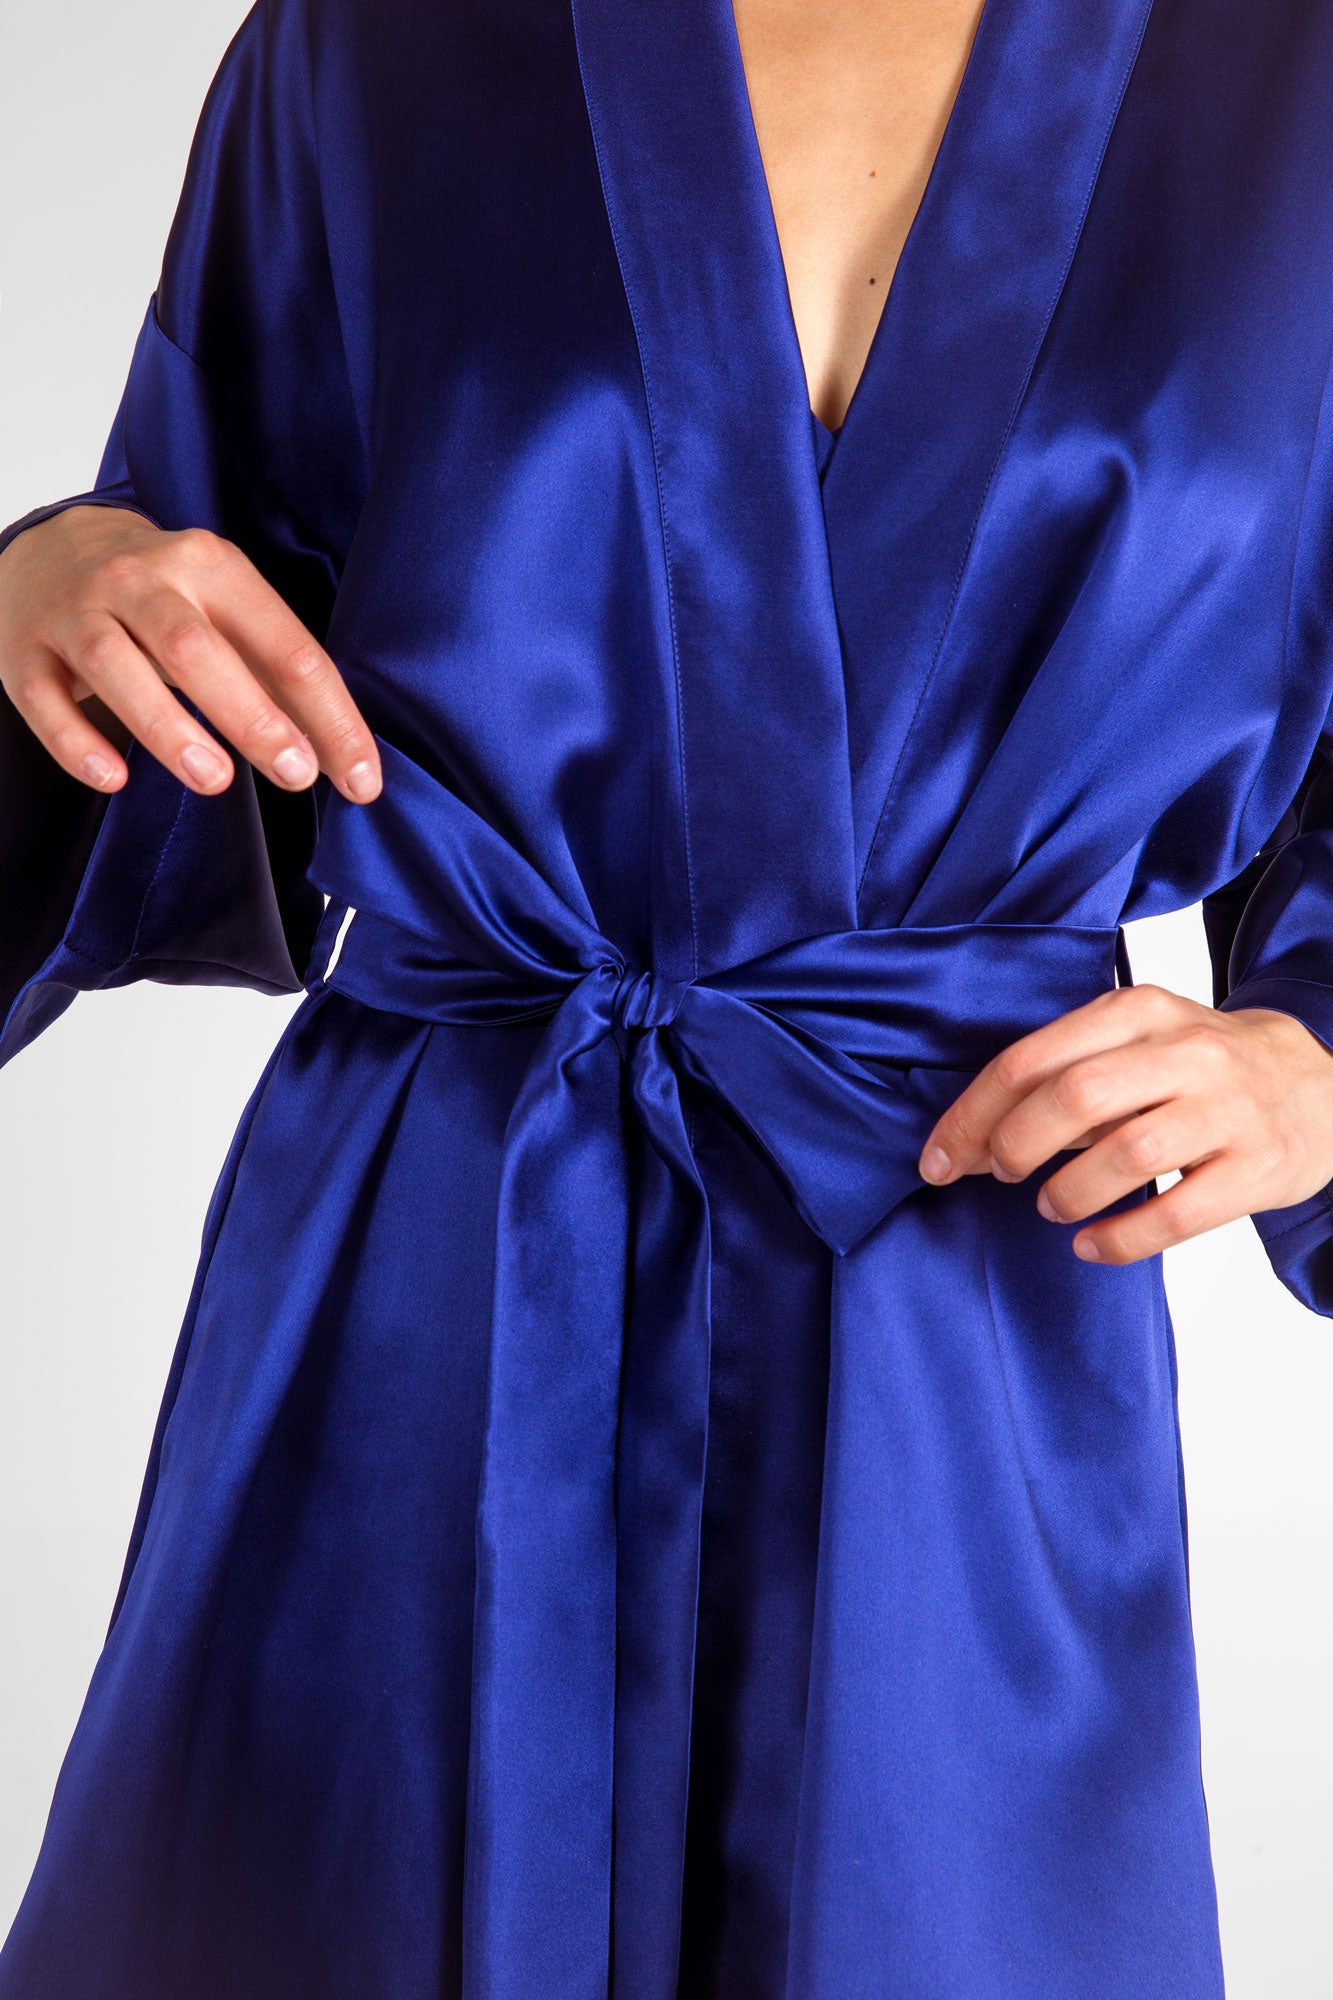 Ladies' silk robe in real blue silk satin with a bow